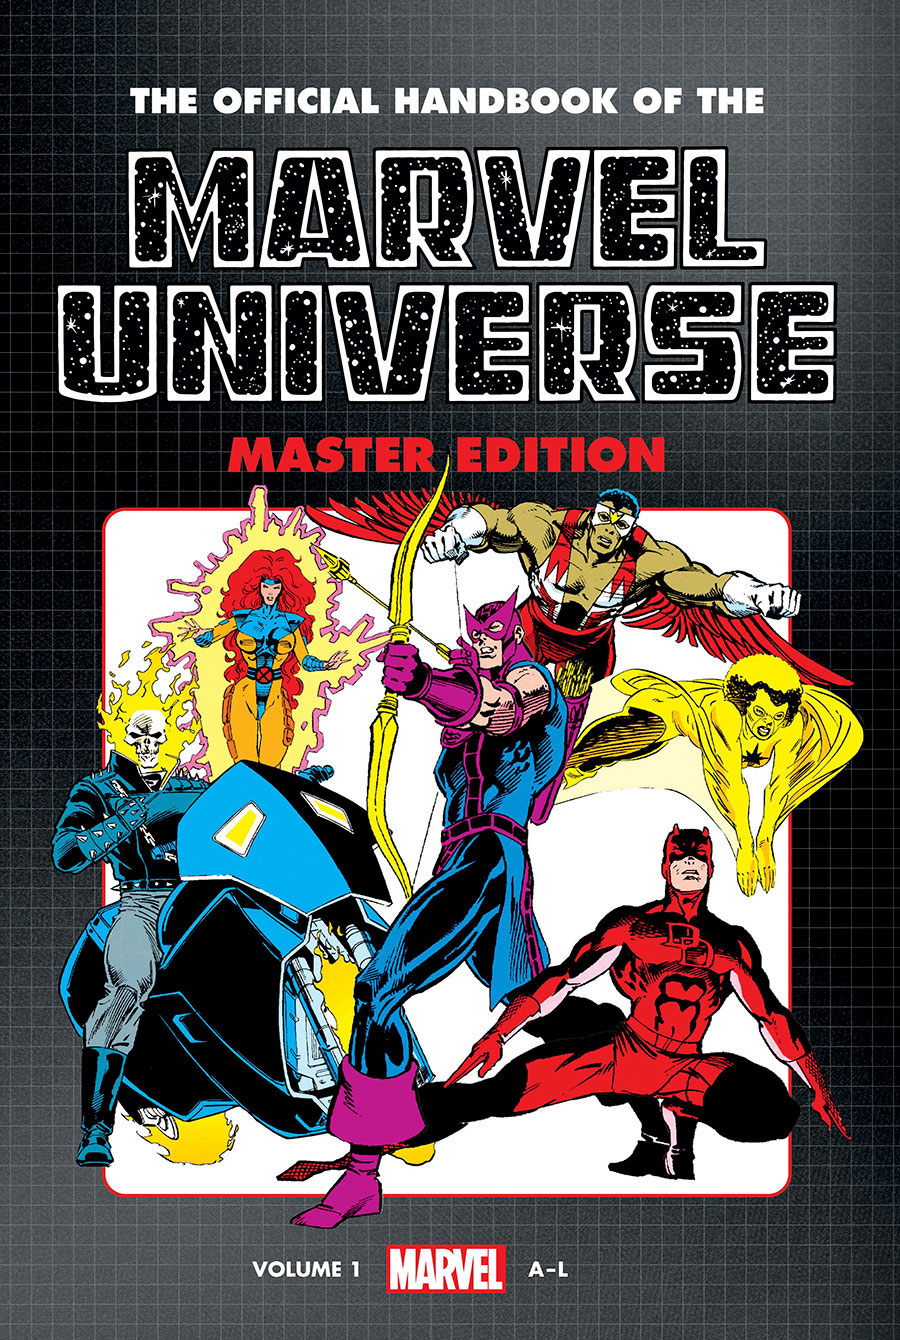 Official Handbook Of The Marvel Universe Master Edition Omnibus Vol 1 HC Book Market Heroes Cover